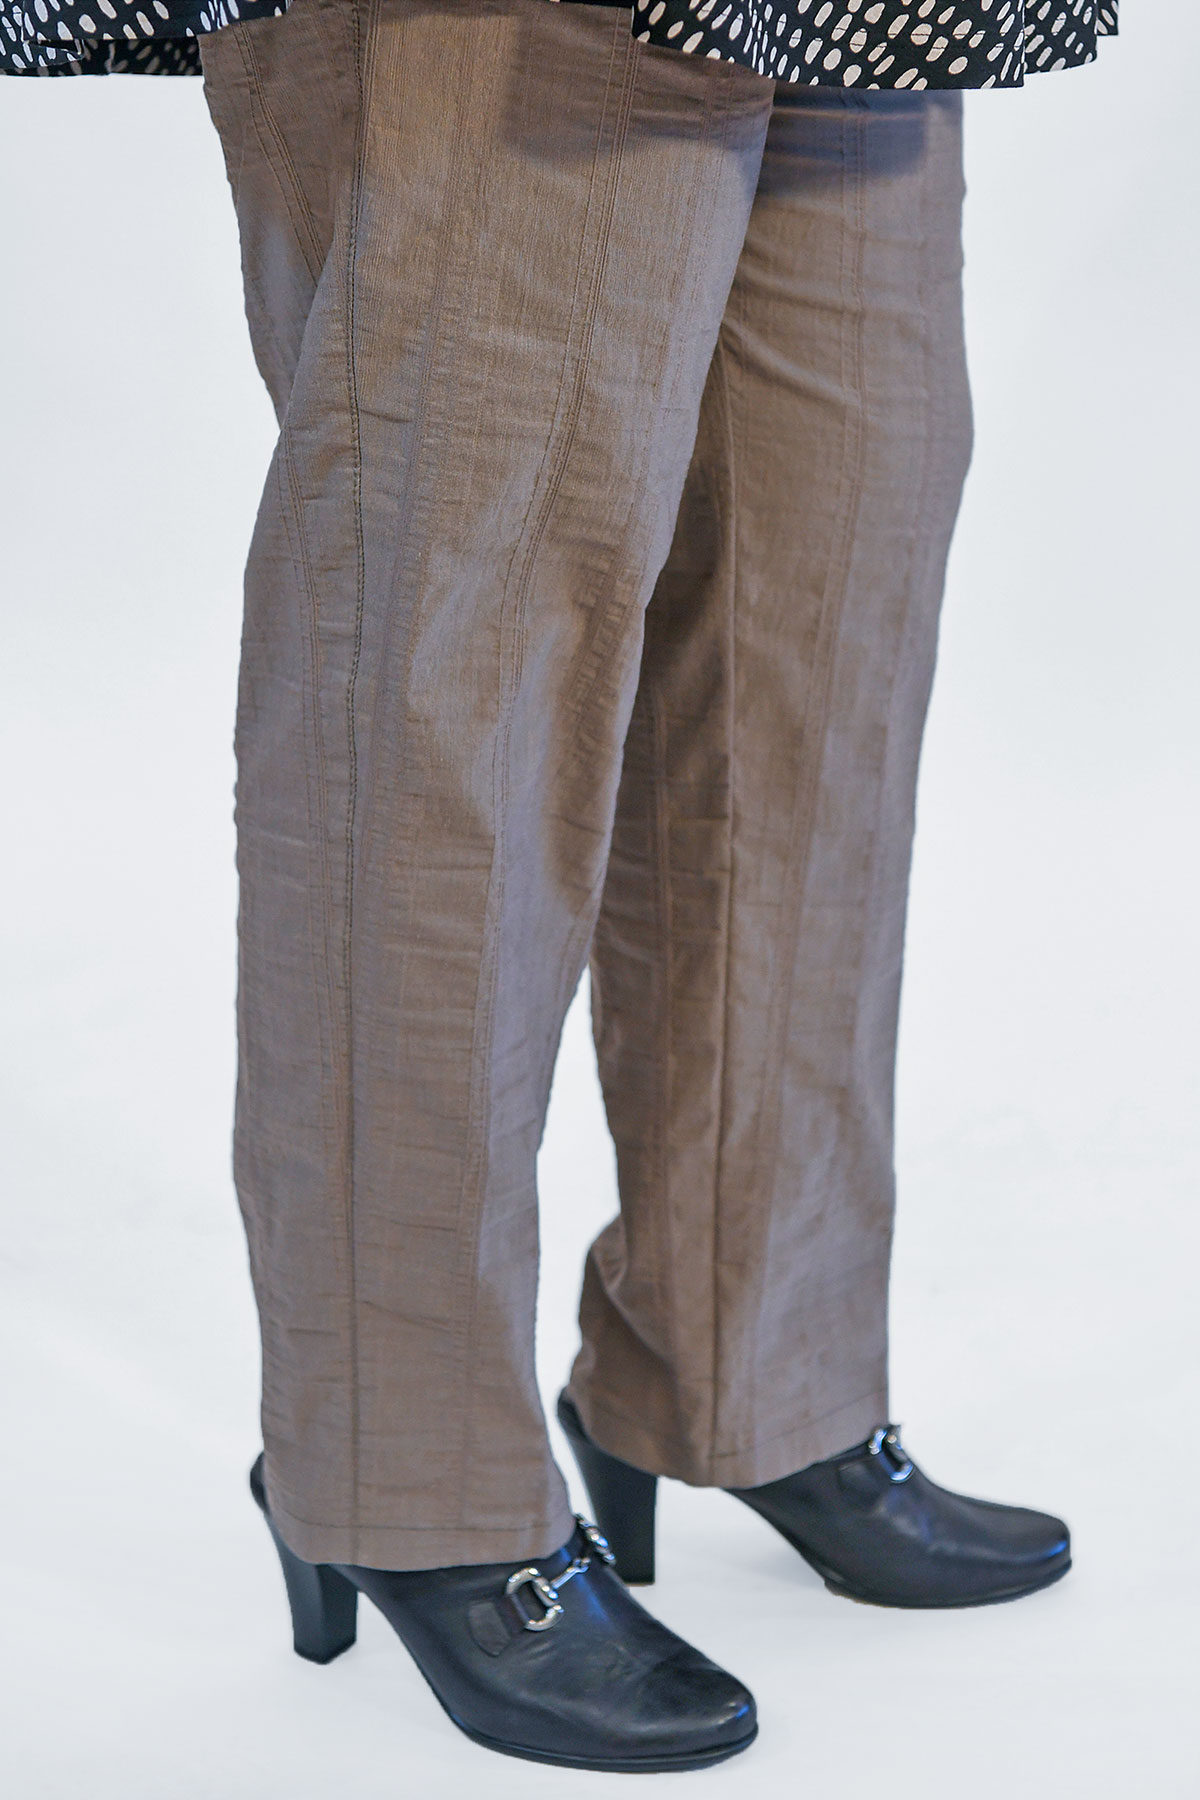 KJ Brand Wash & Go Trousers - taupe